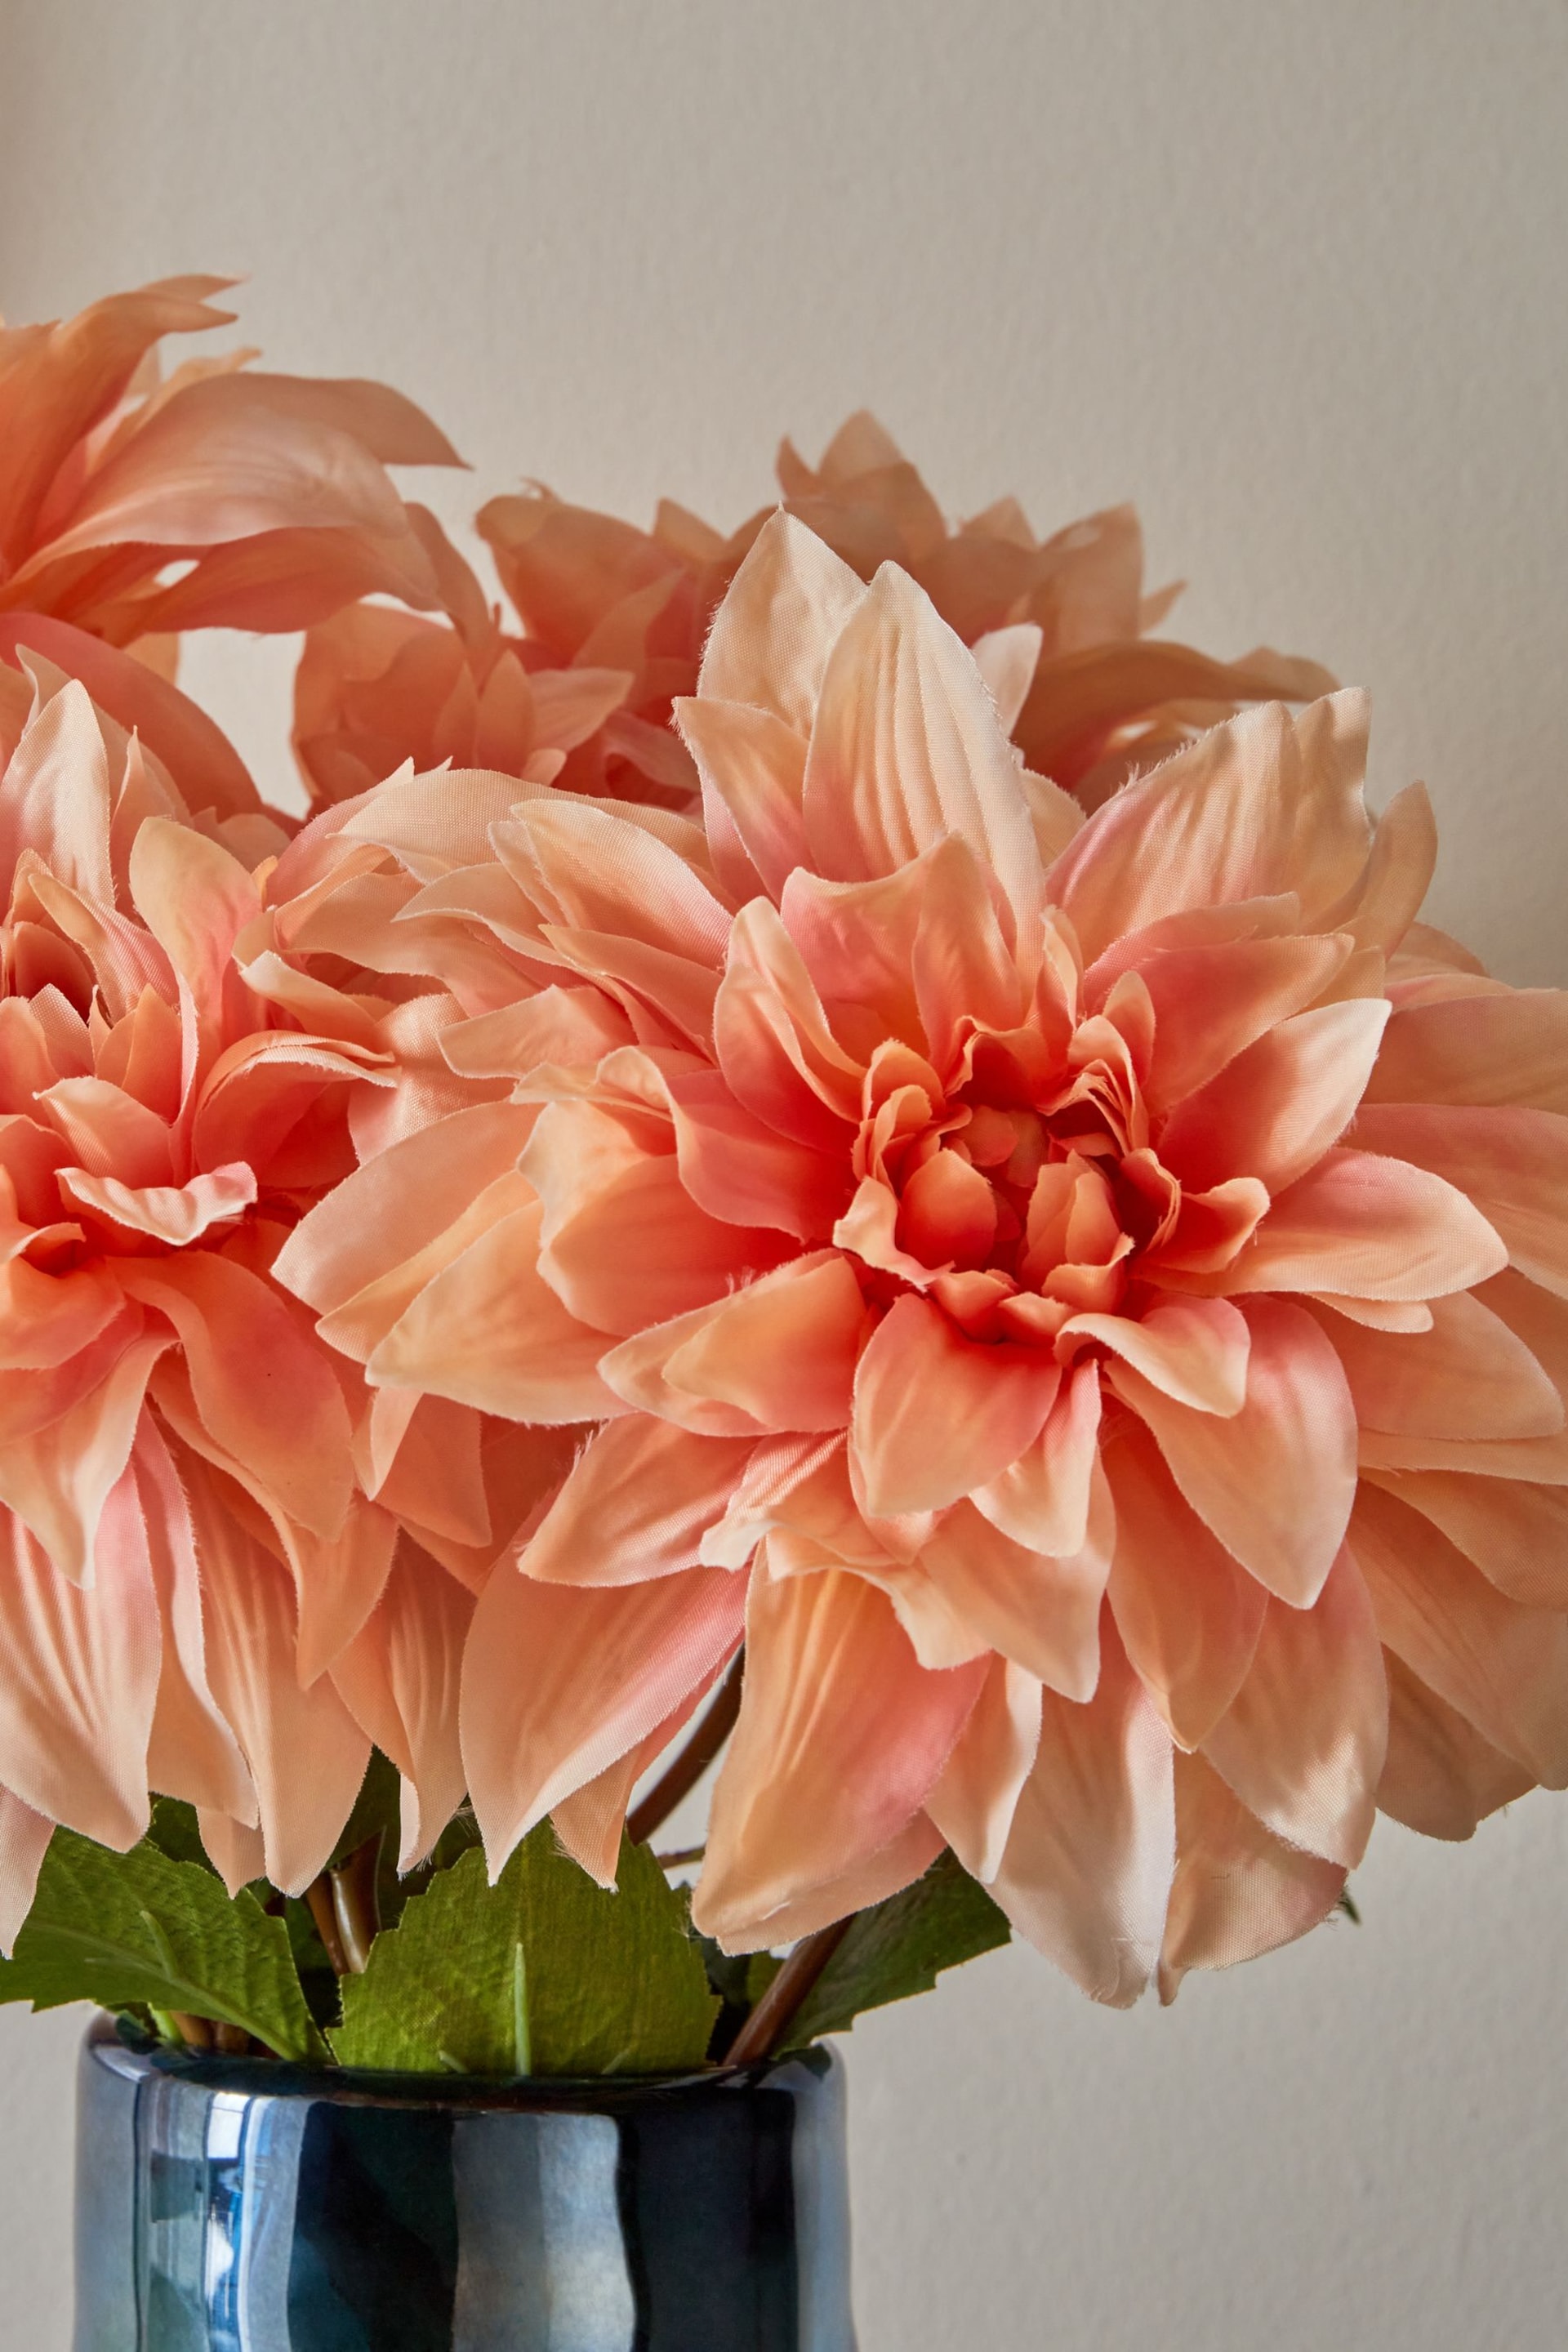 Set of 2 Coral Pink Artificial Dahlia Stems - Image 3 of 4